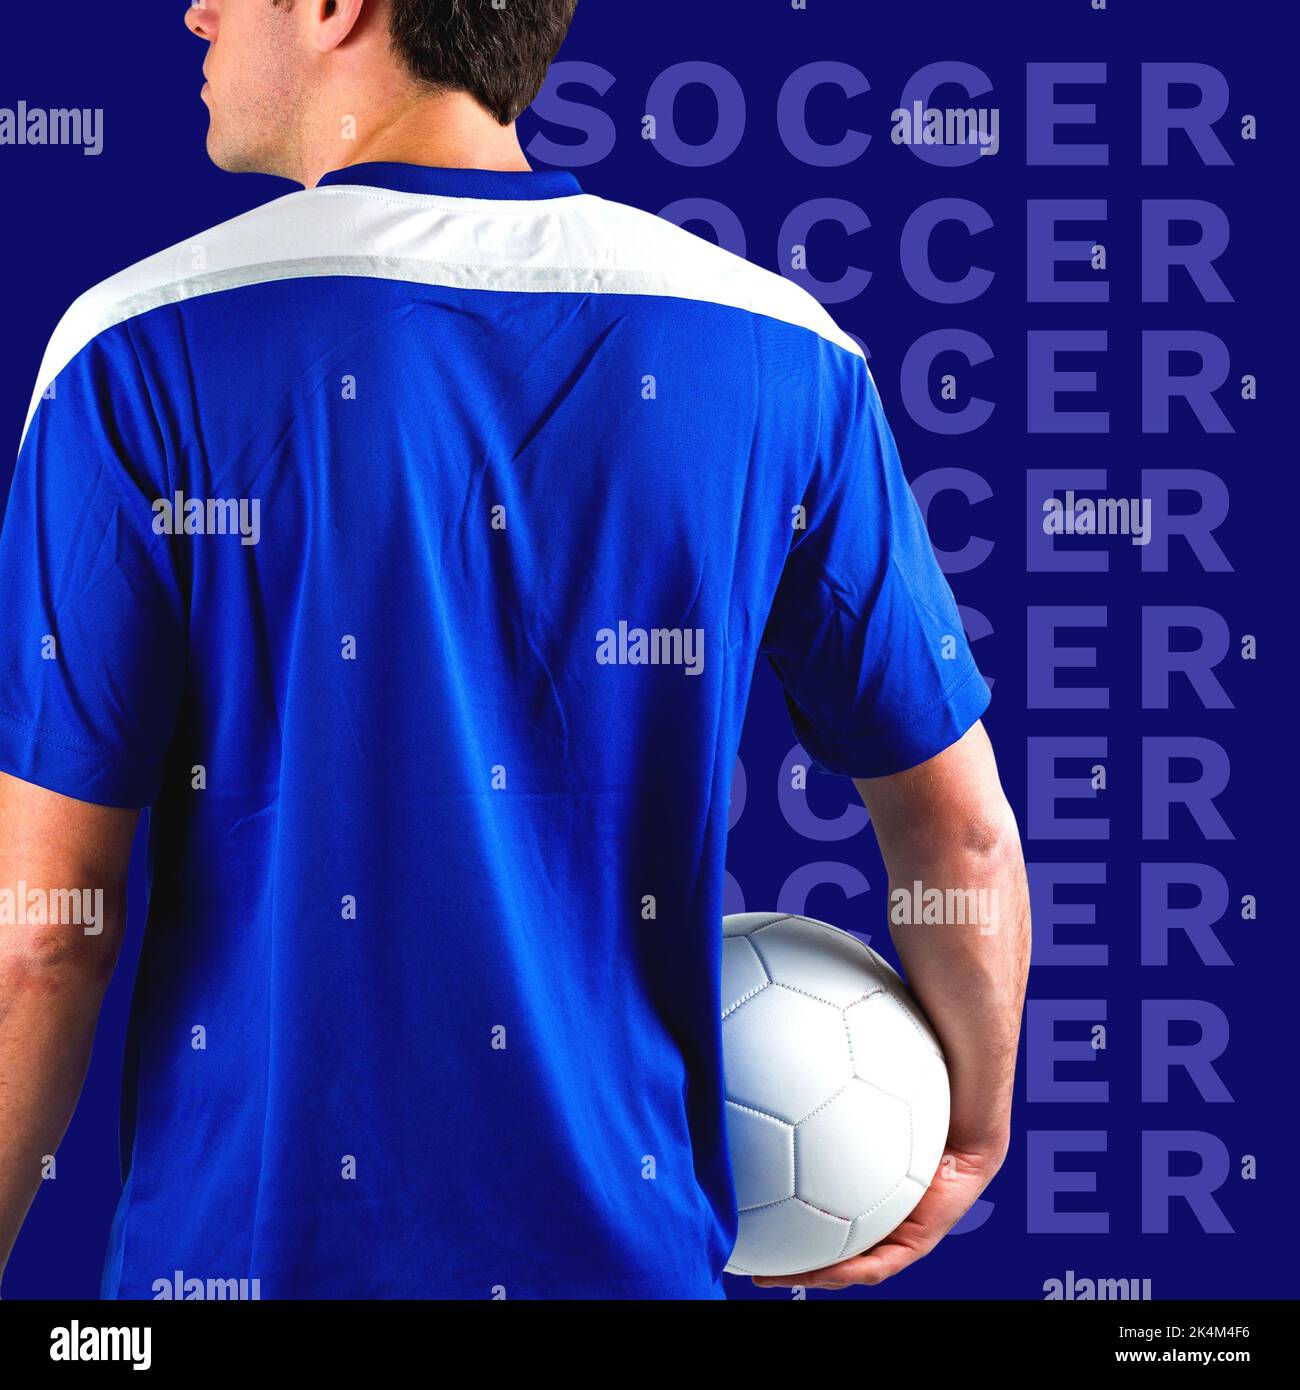 Square image of multiplied soccer and midsection of back of caucasian male player with ball Stock Photo